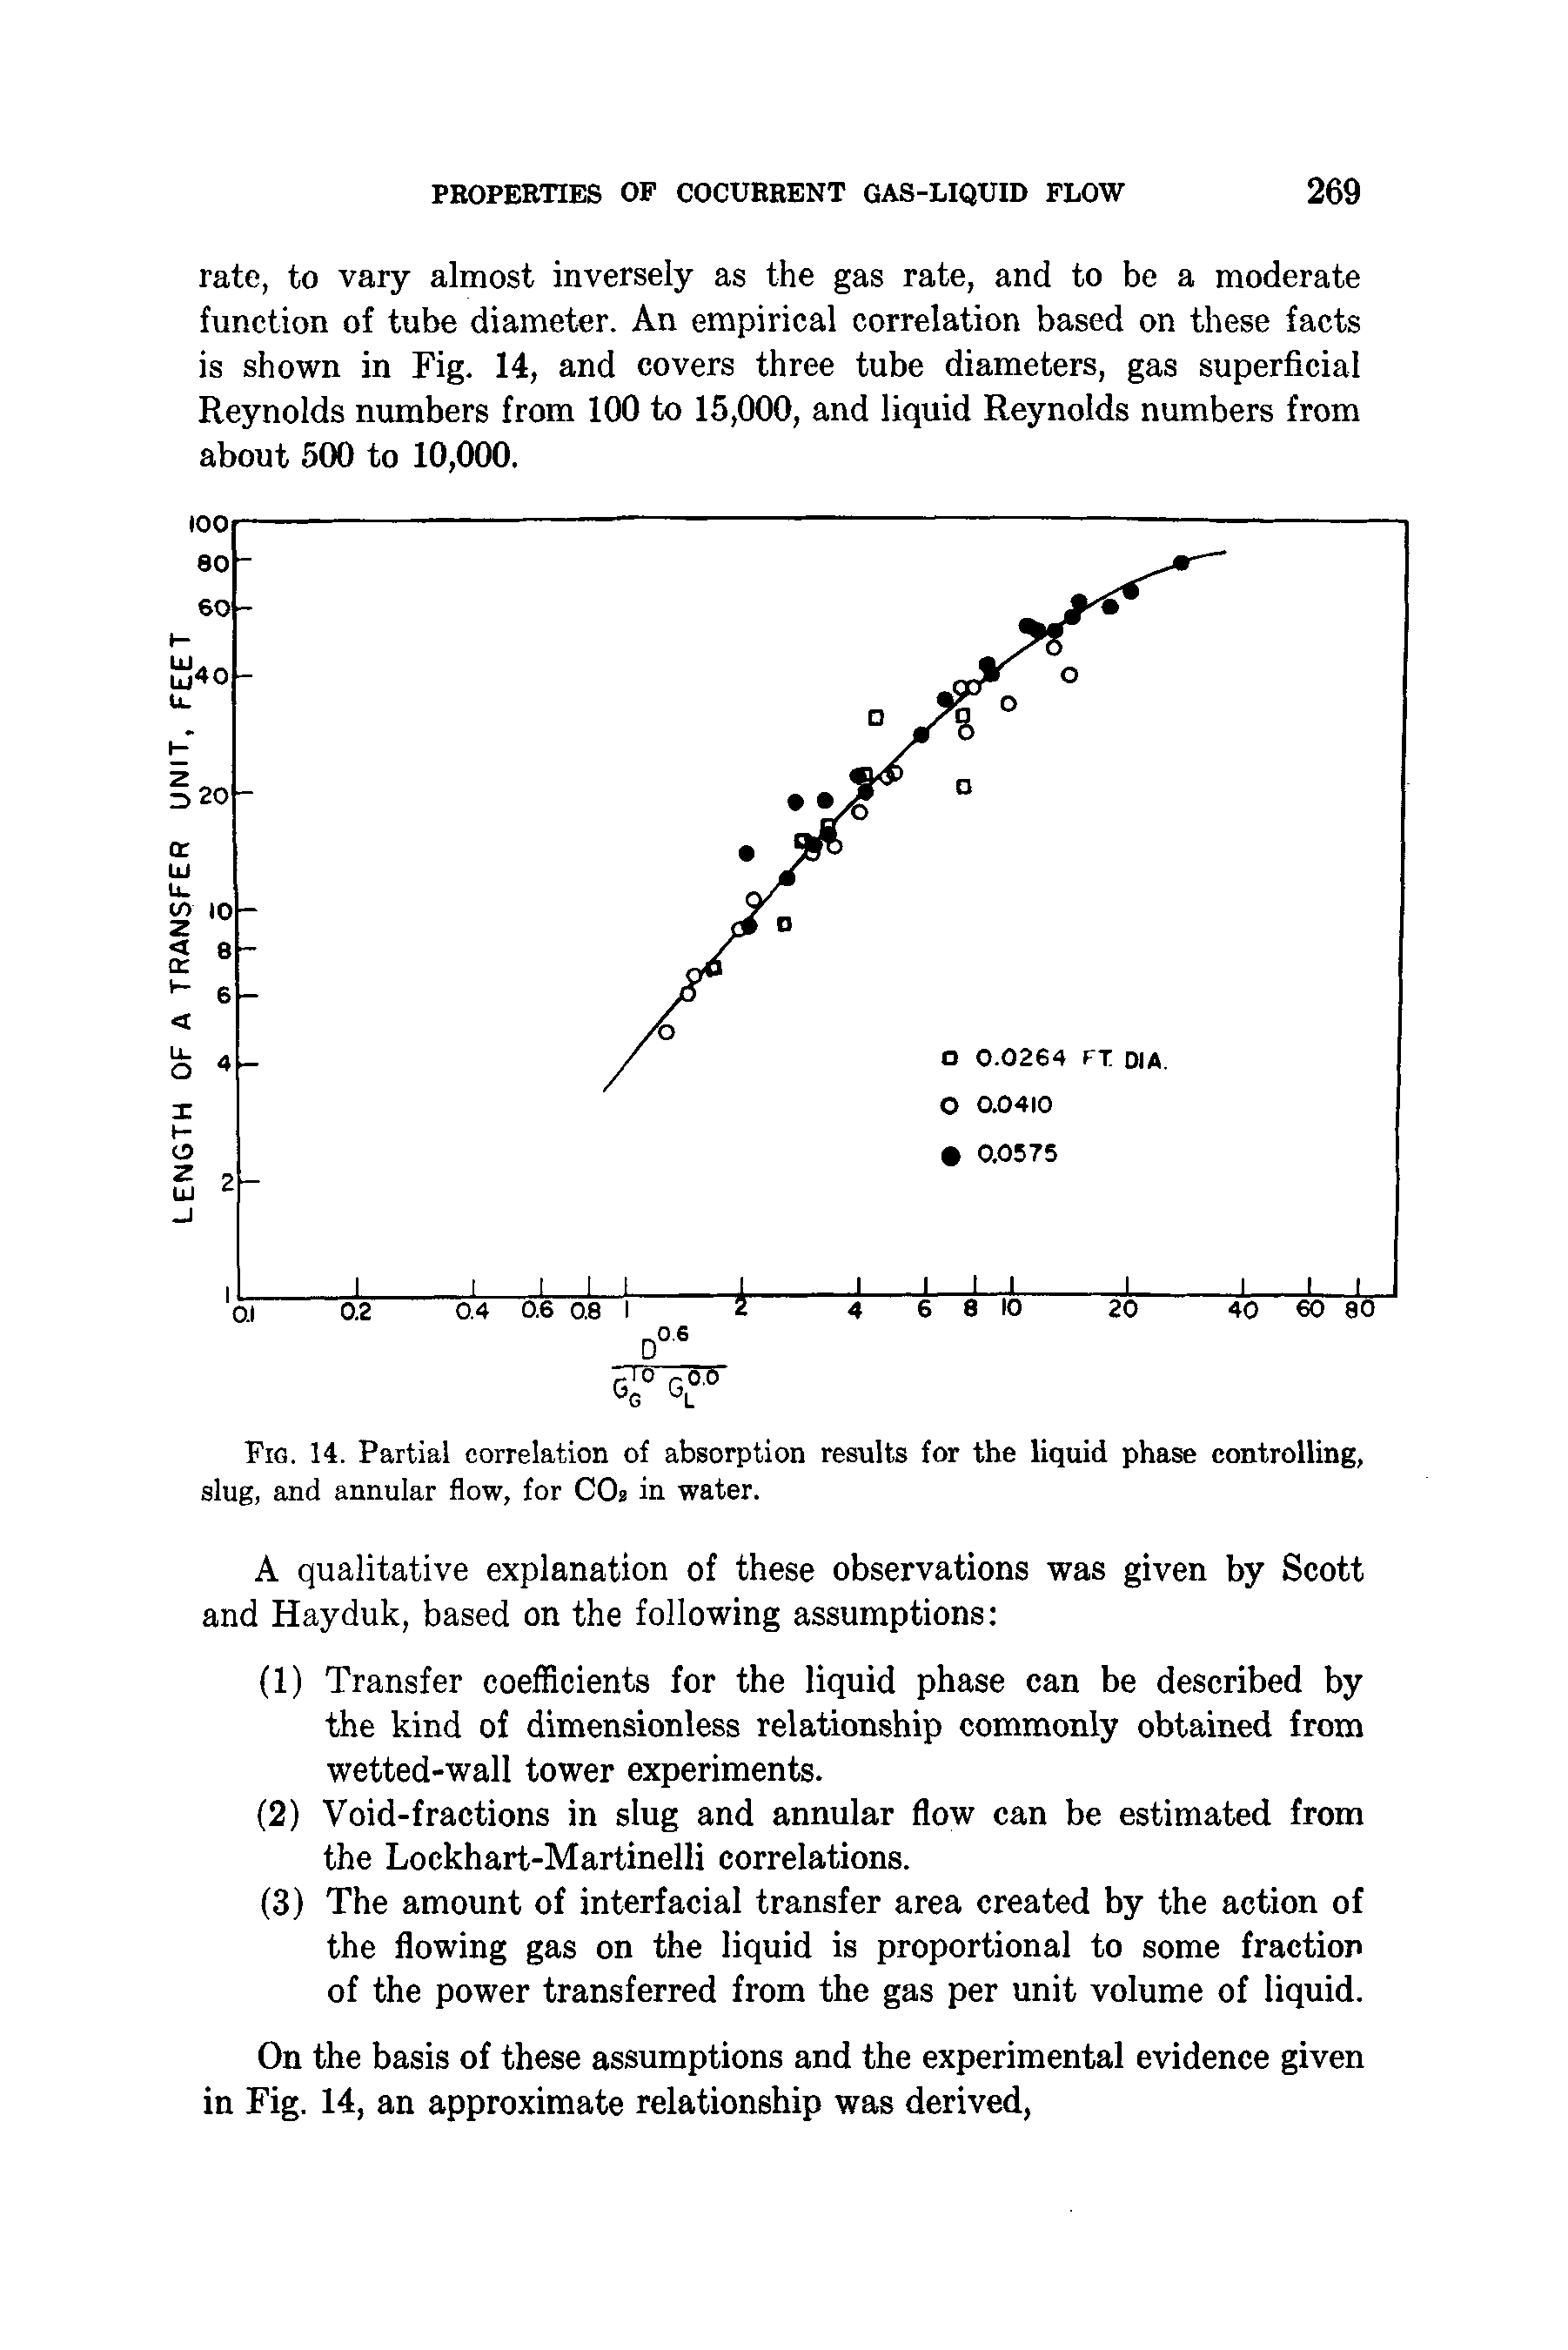 Fig. 14. Partial correlation of absorption results for the liquid phase controlling, slug, and annular flow, for CO2 in water.